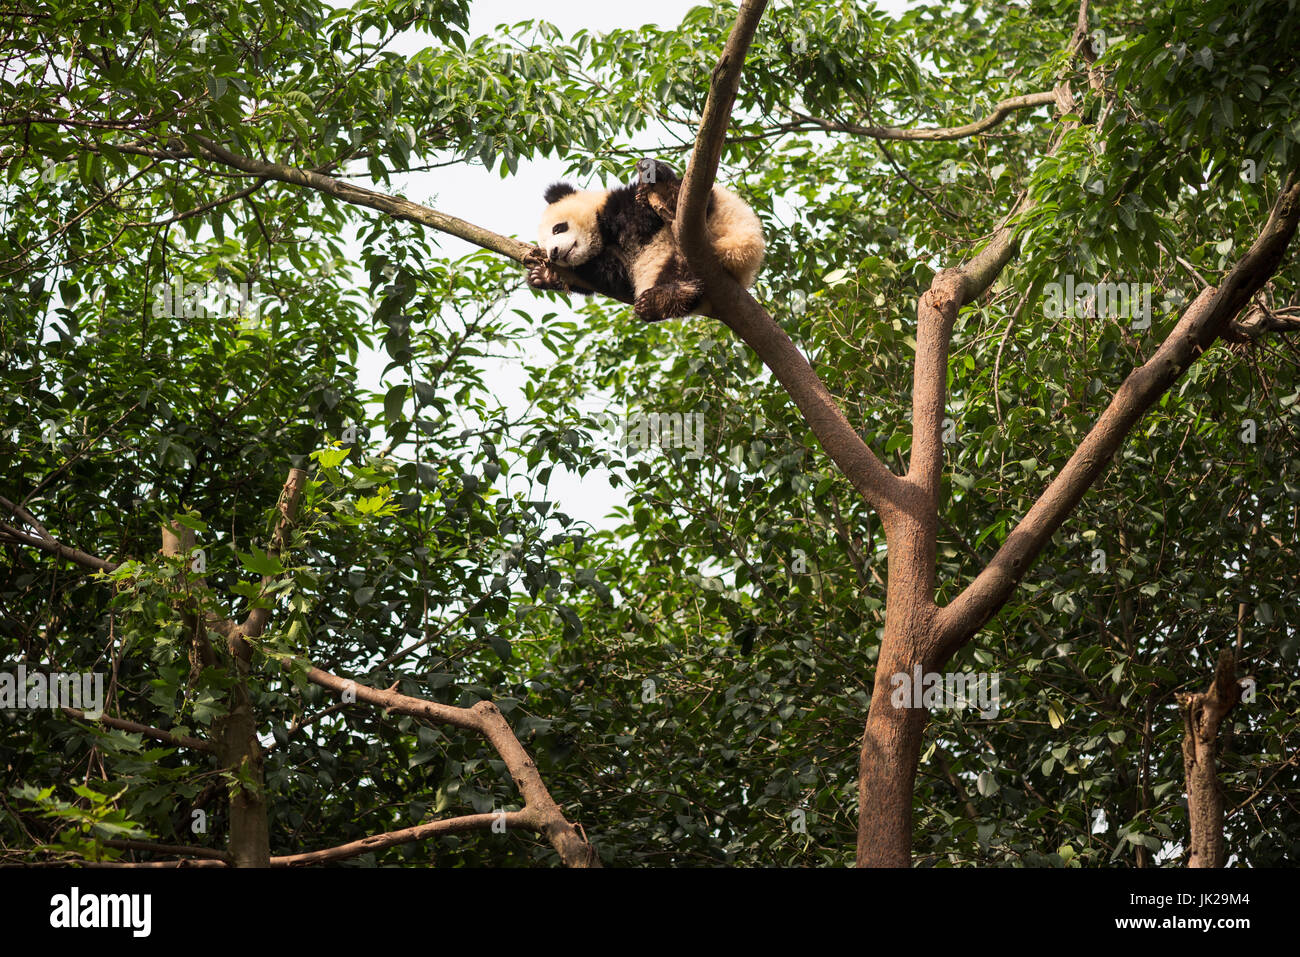 Giant panda cub sleeping at the top of a tree, Chengdu, Sichuan Province, China Stock Photo